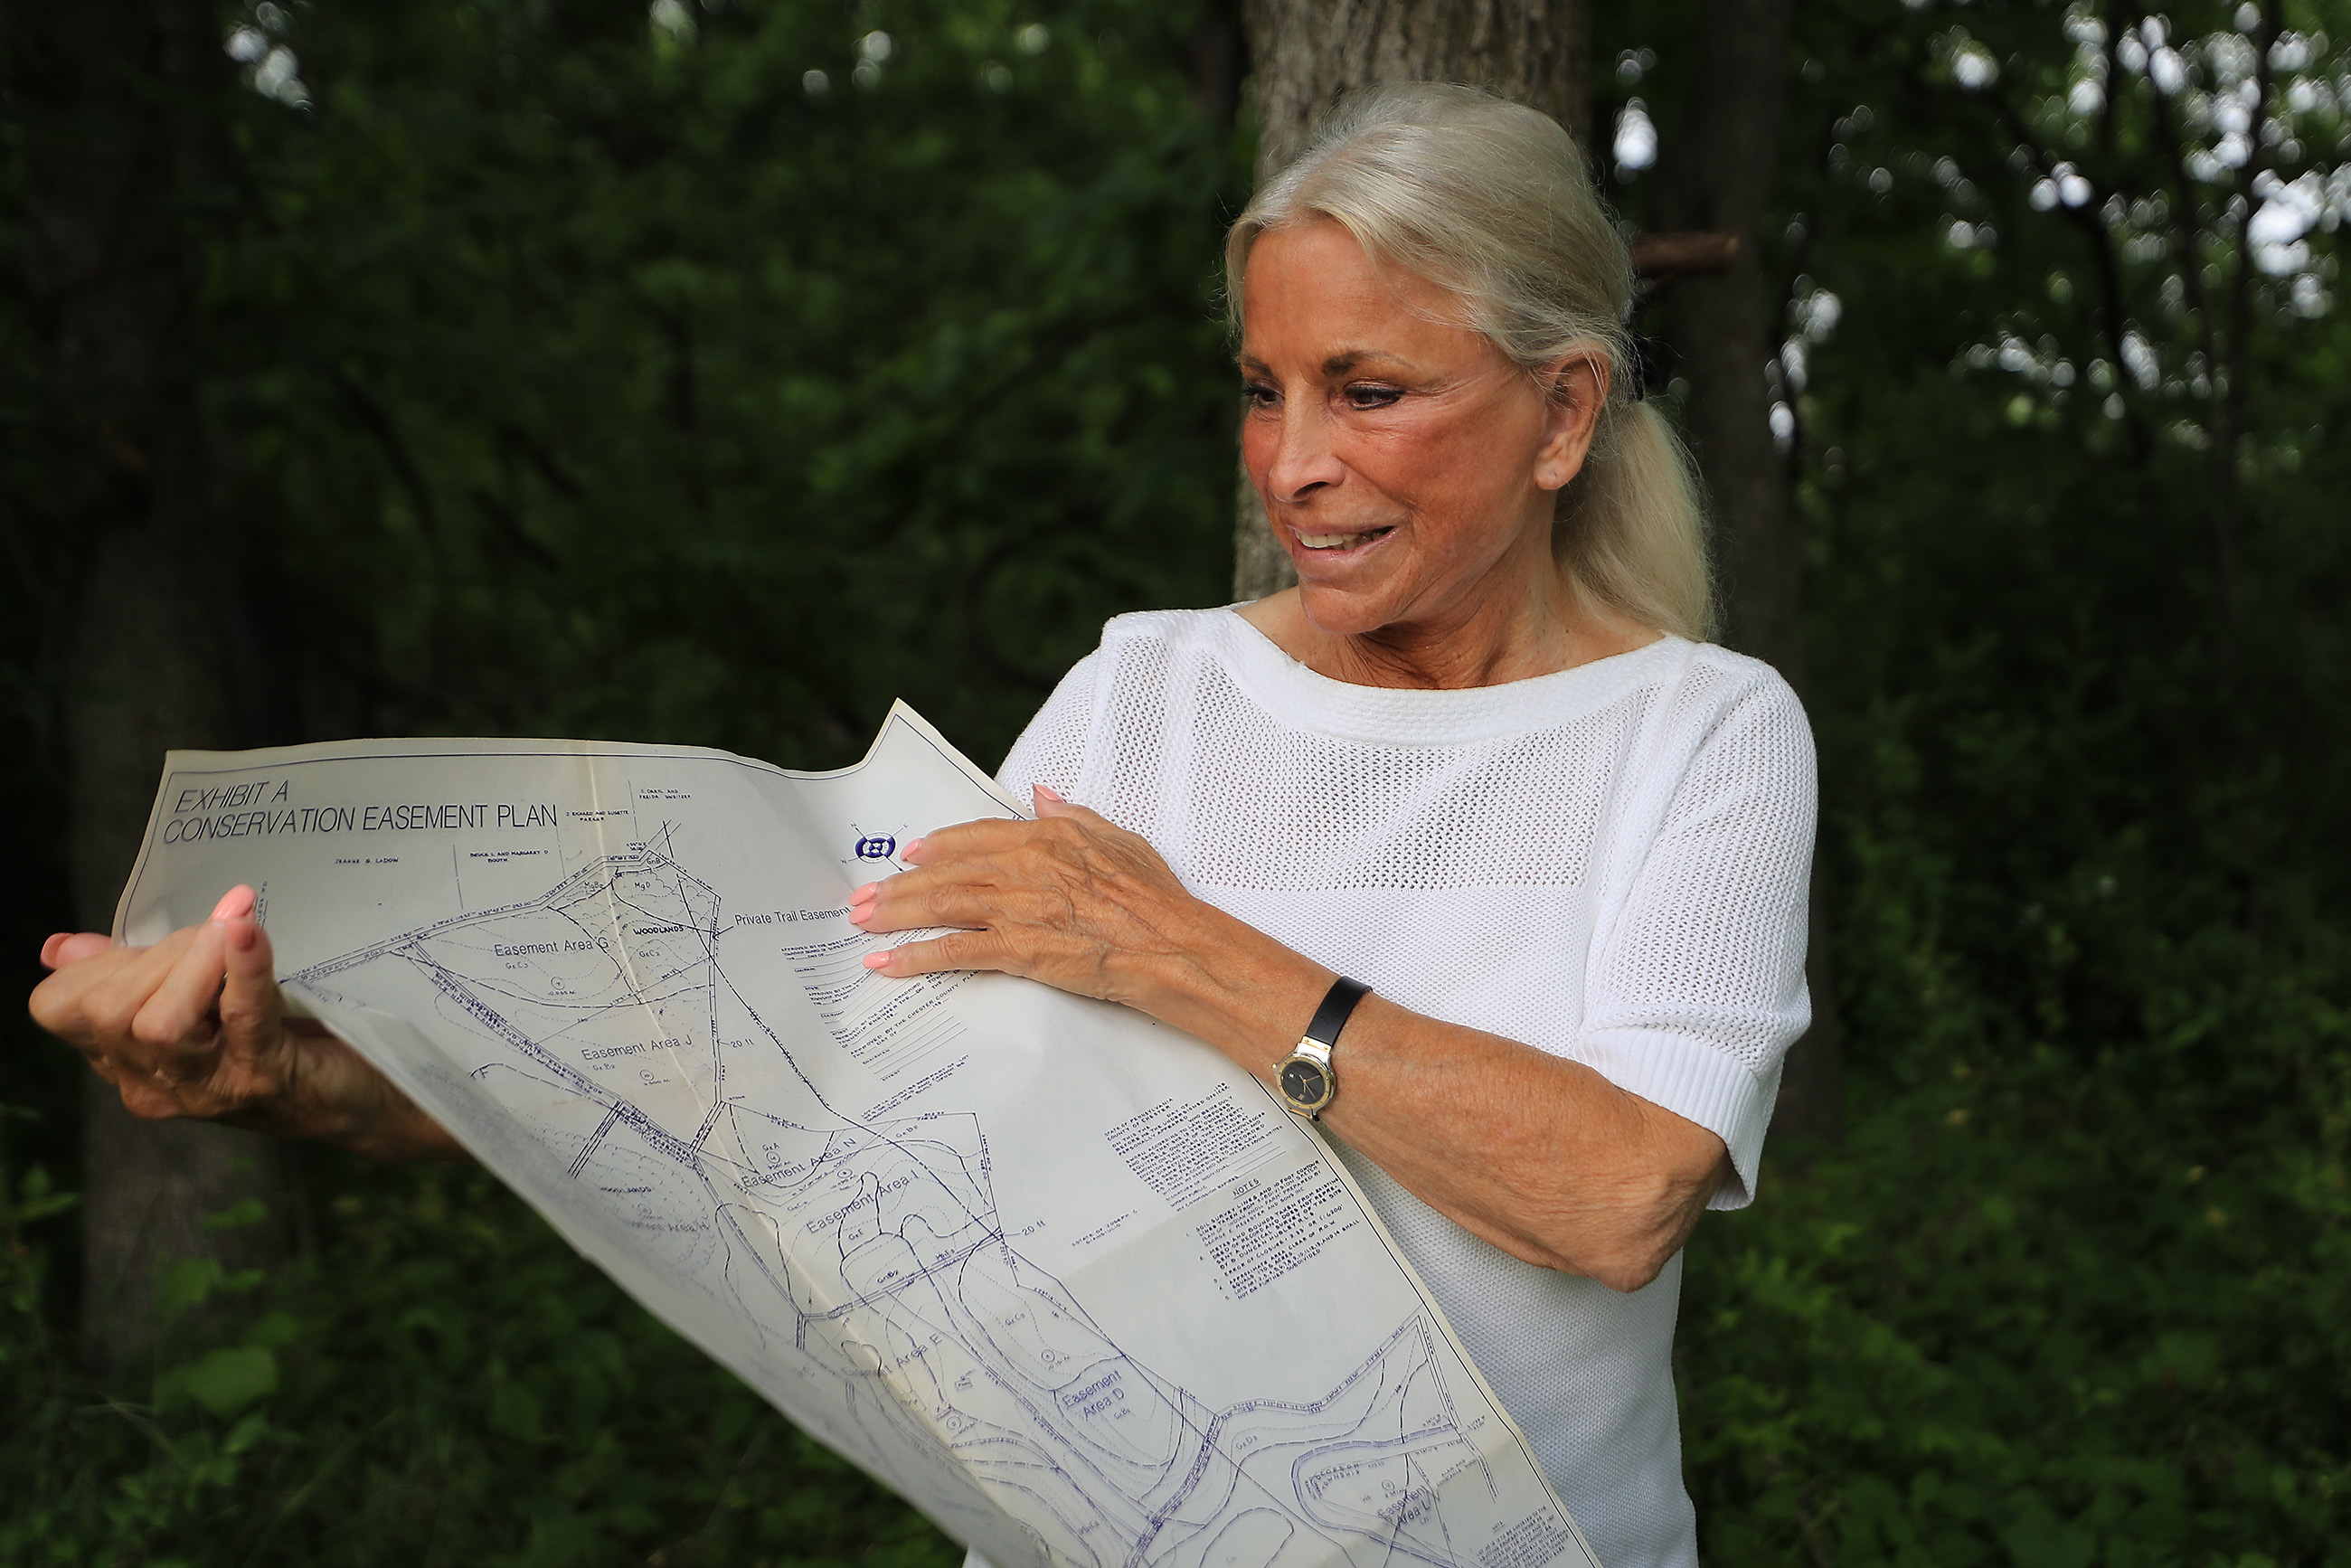 A Chester County woman wants to donate a Native American burial ground